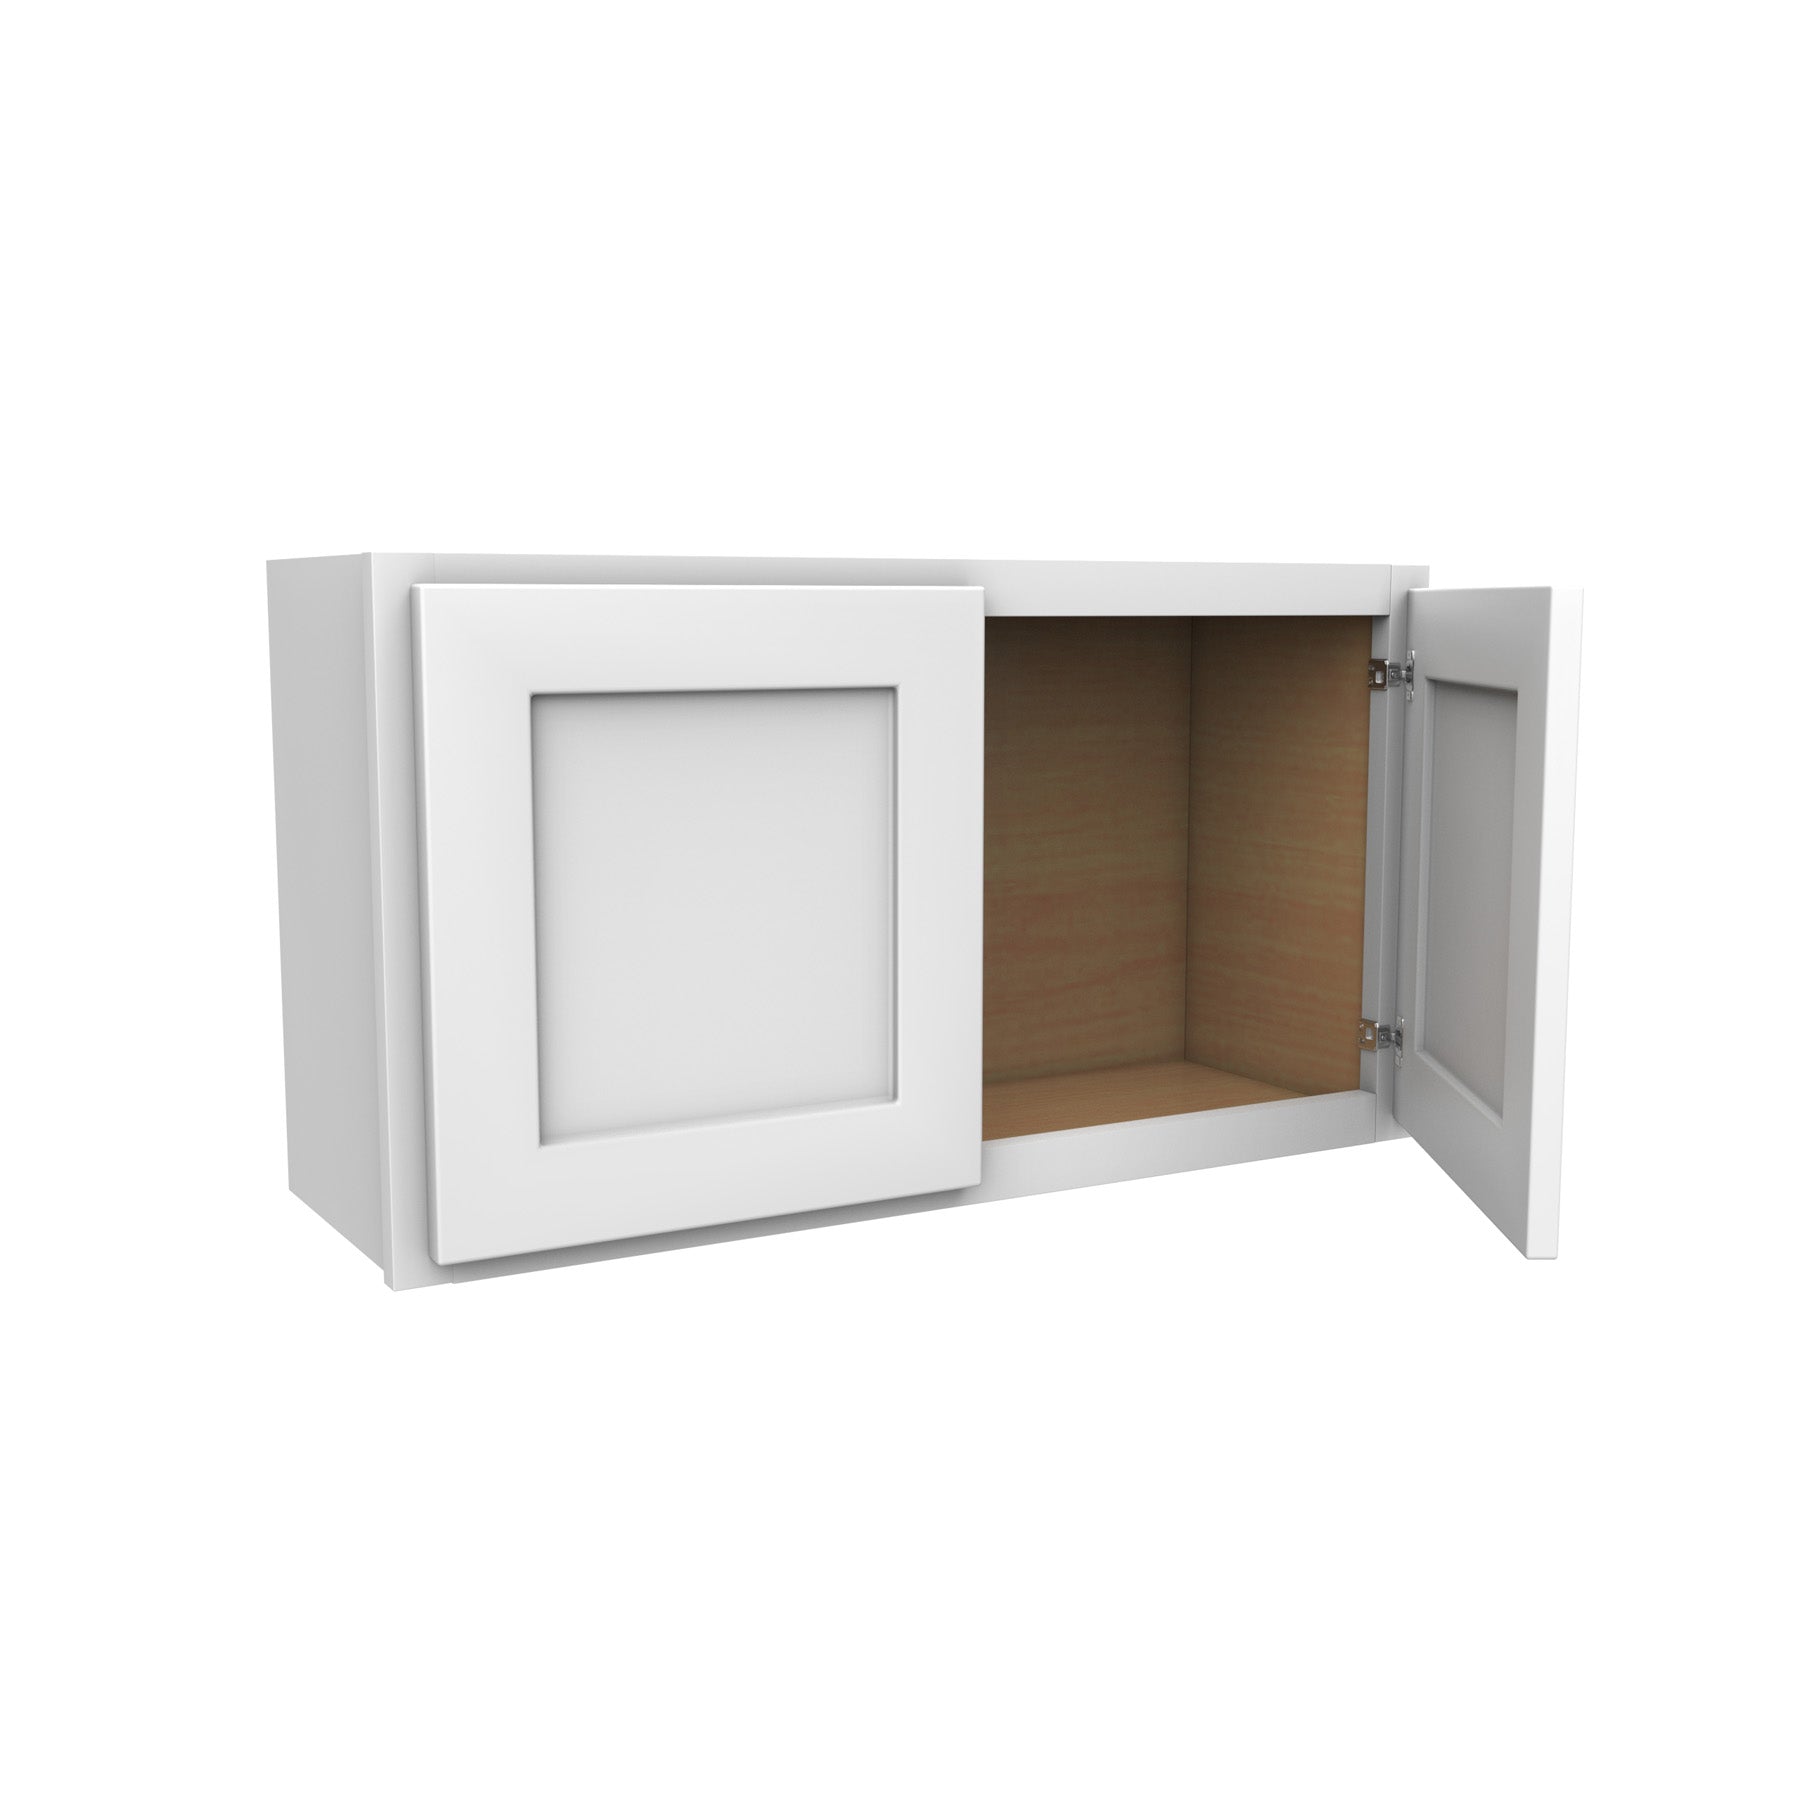 18 Inch High Double Door Wall Cabinet - Luxor White Shaker - Ready To Assemble, 33"W x 18"H x 12"D